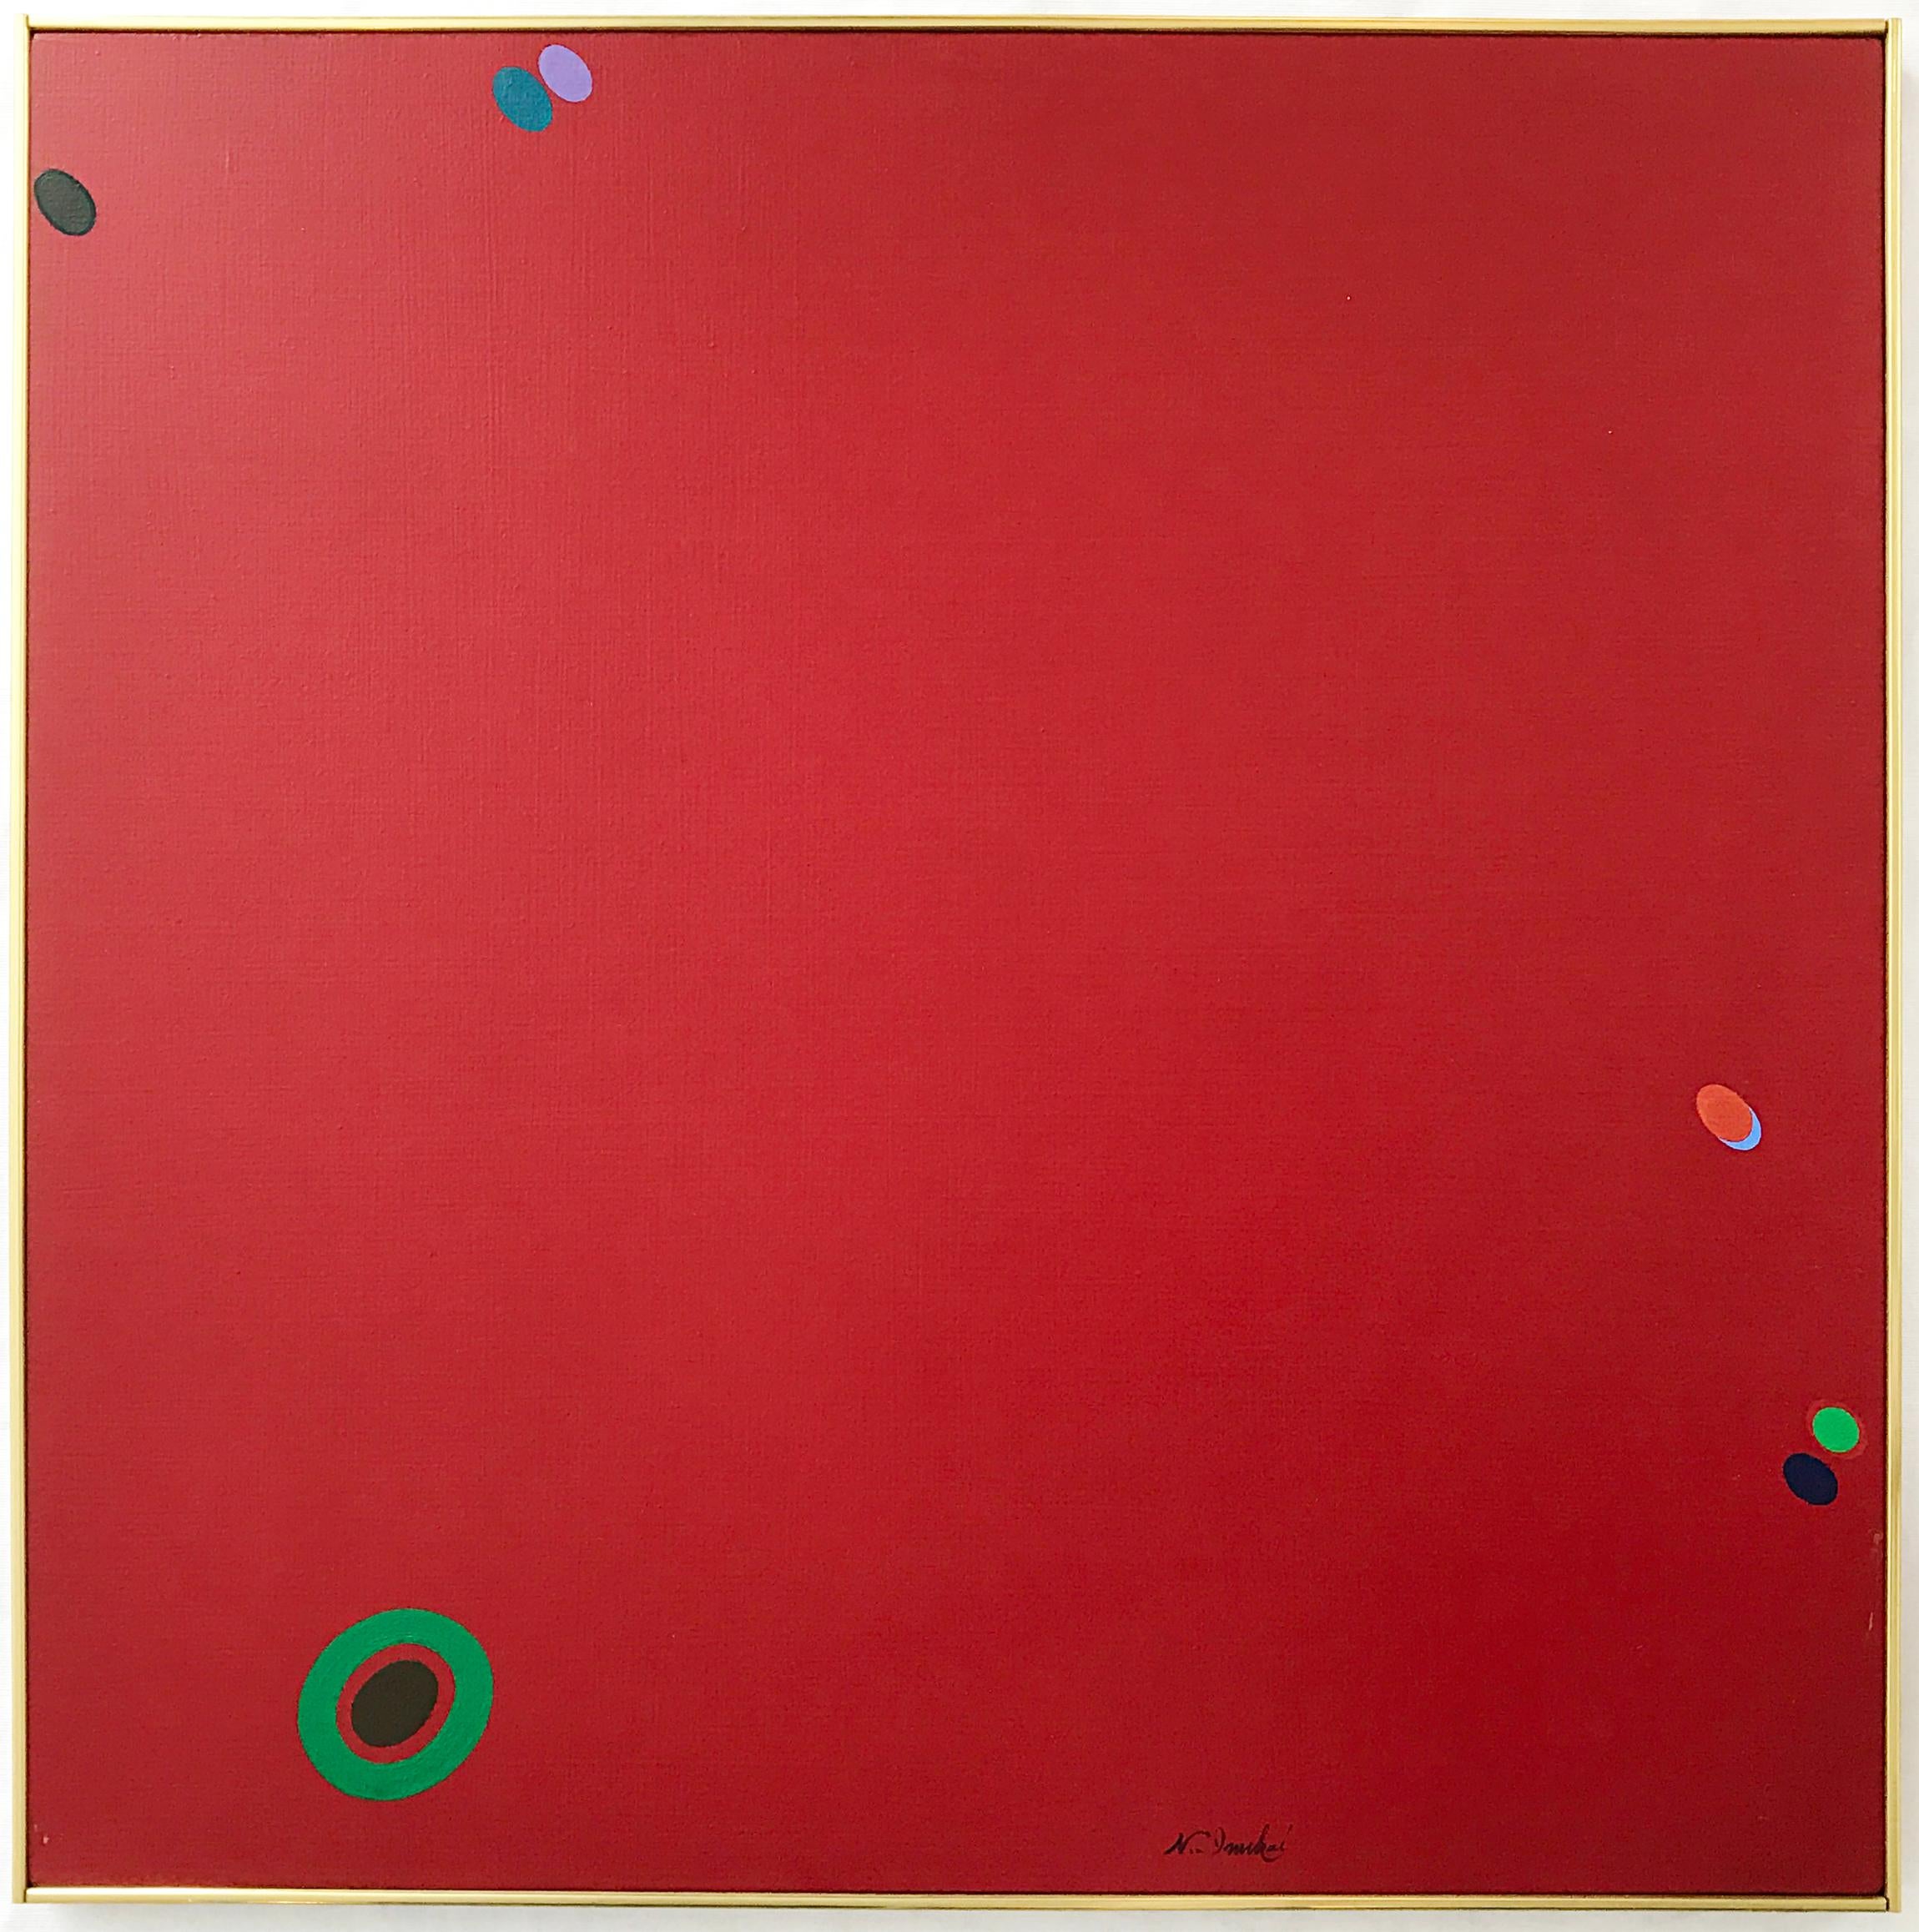 Naohiko Inukai  Abstract Painting - Untitled Red with Floating Dots painting by Naohiko Inukai